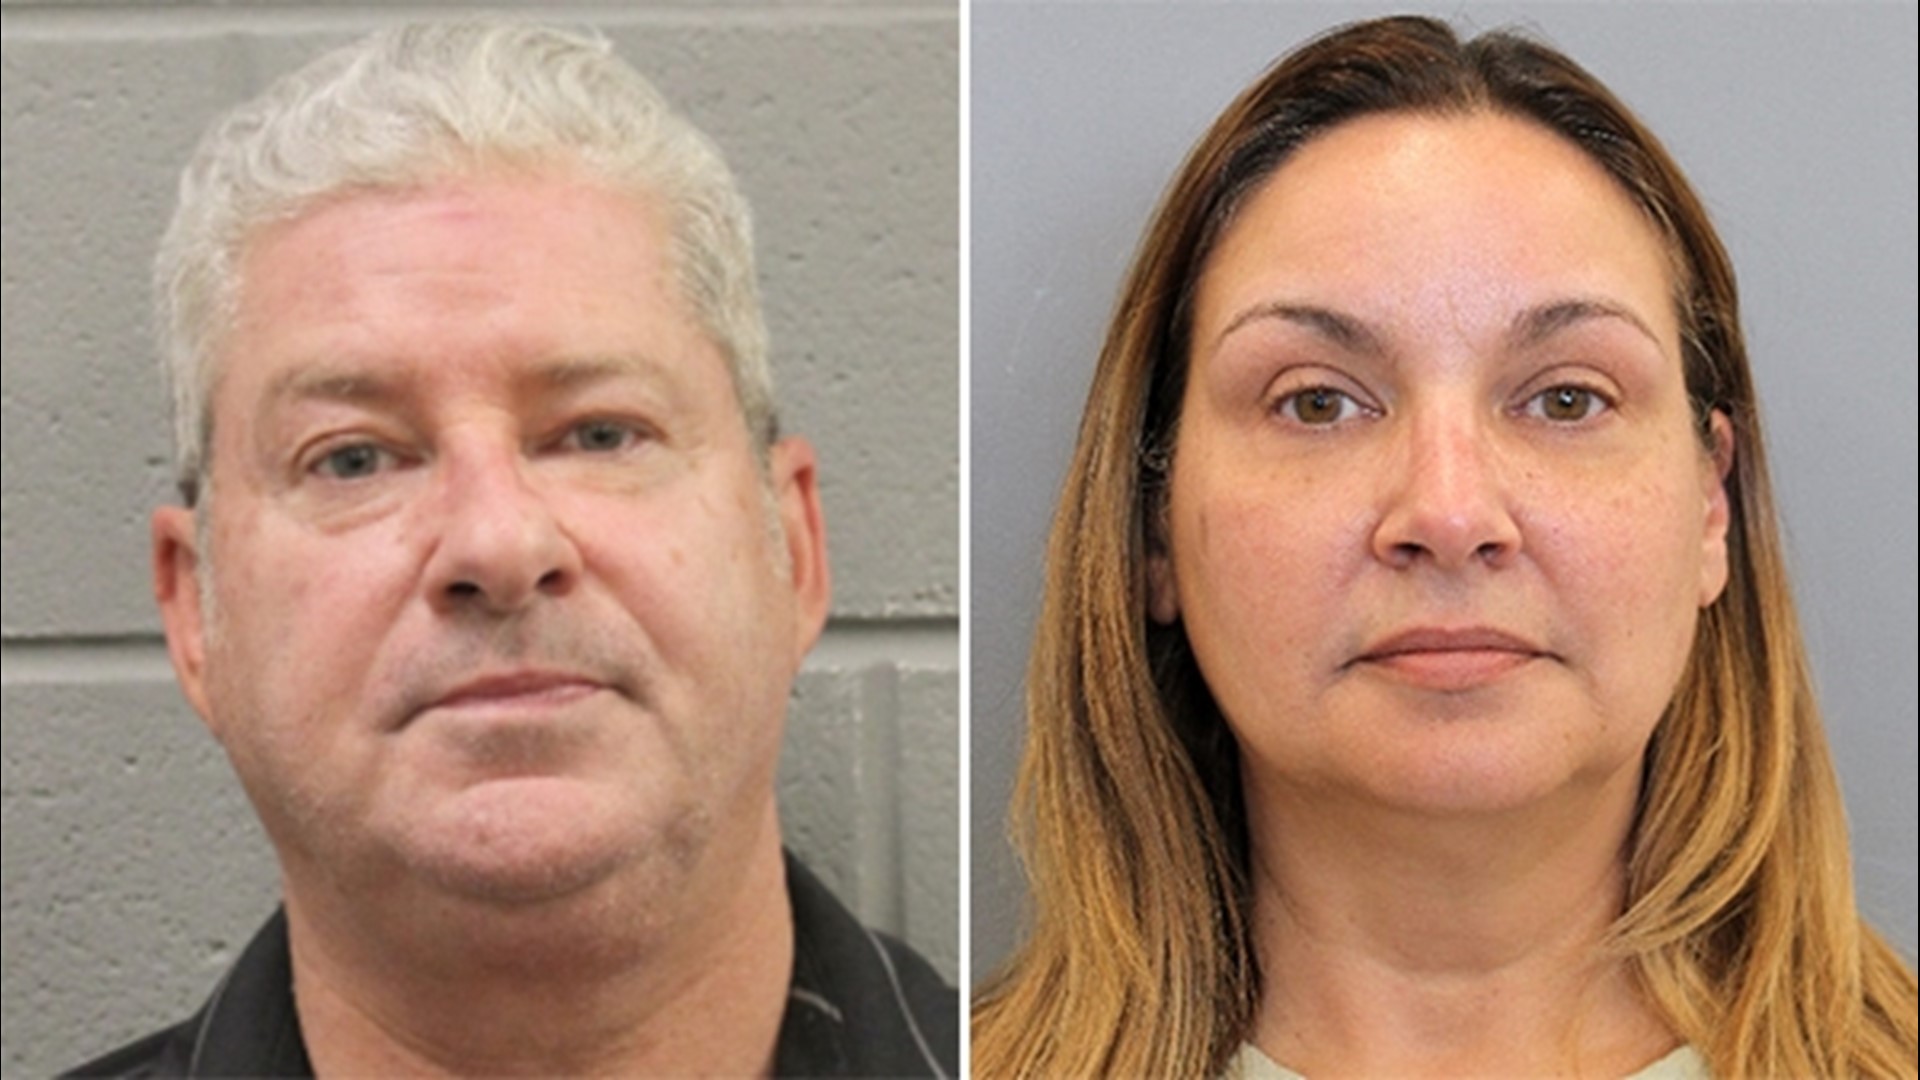 Aleck Miller and his wife Andrea Miller, who own AM2 Construction, are accused of stealing from clients in Katy, Sugar Land and Cypress.